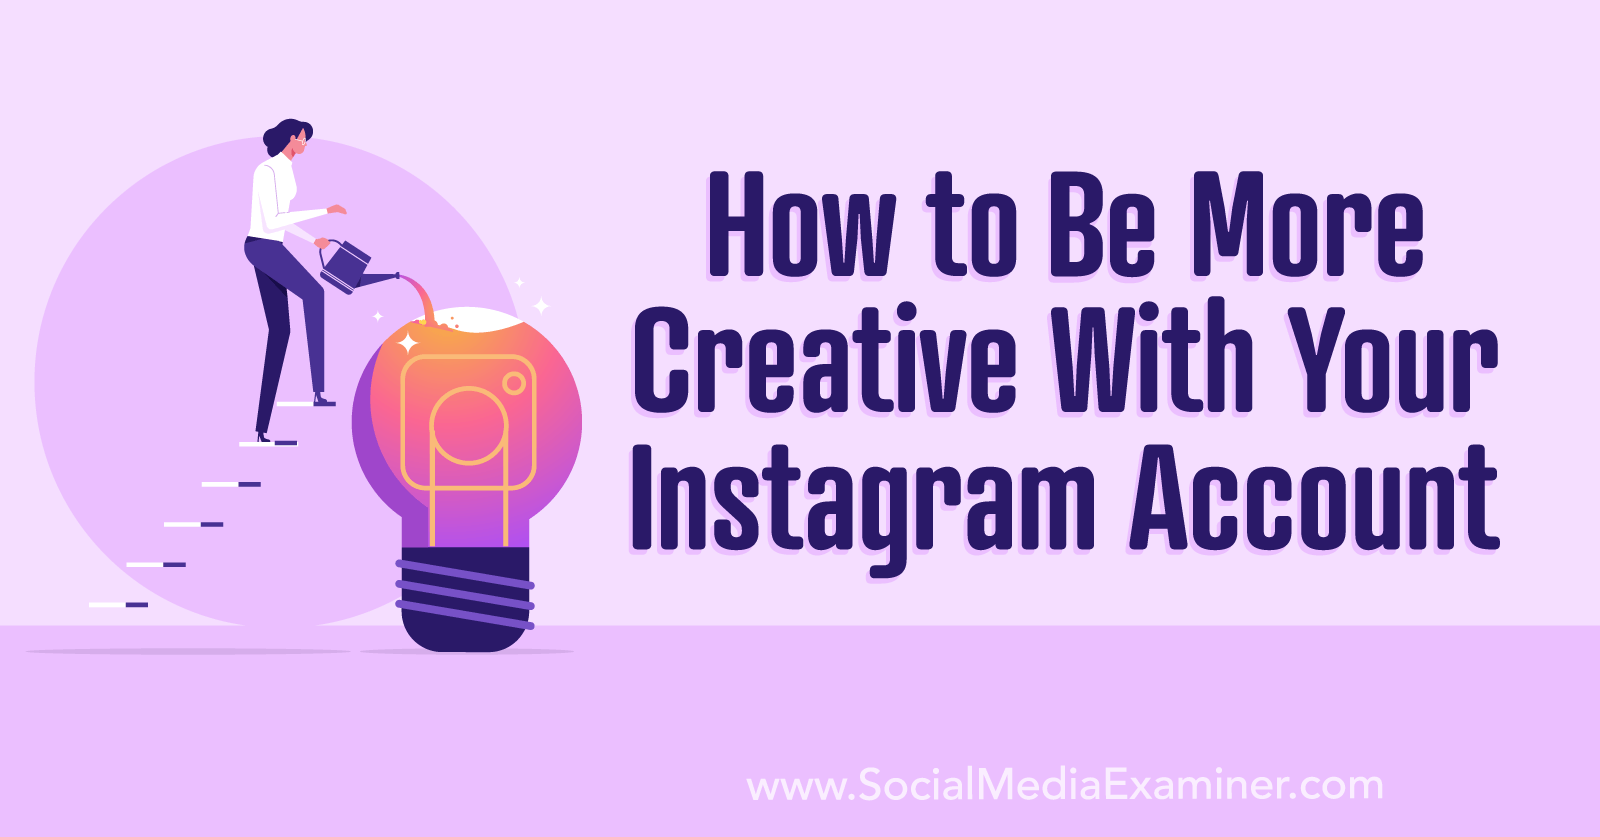 How to Be More Creative With Your Instagram Content by Social Media Examiner